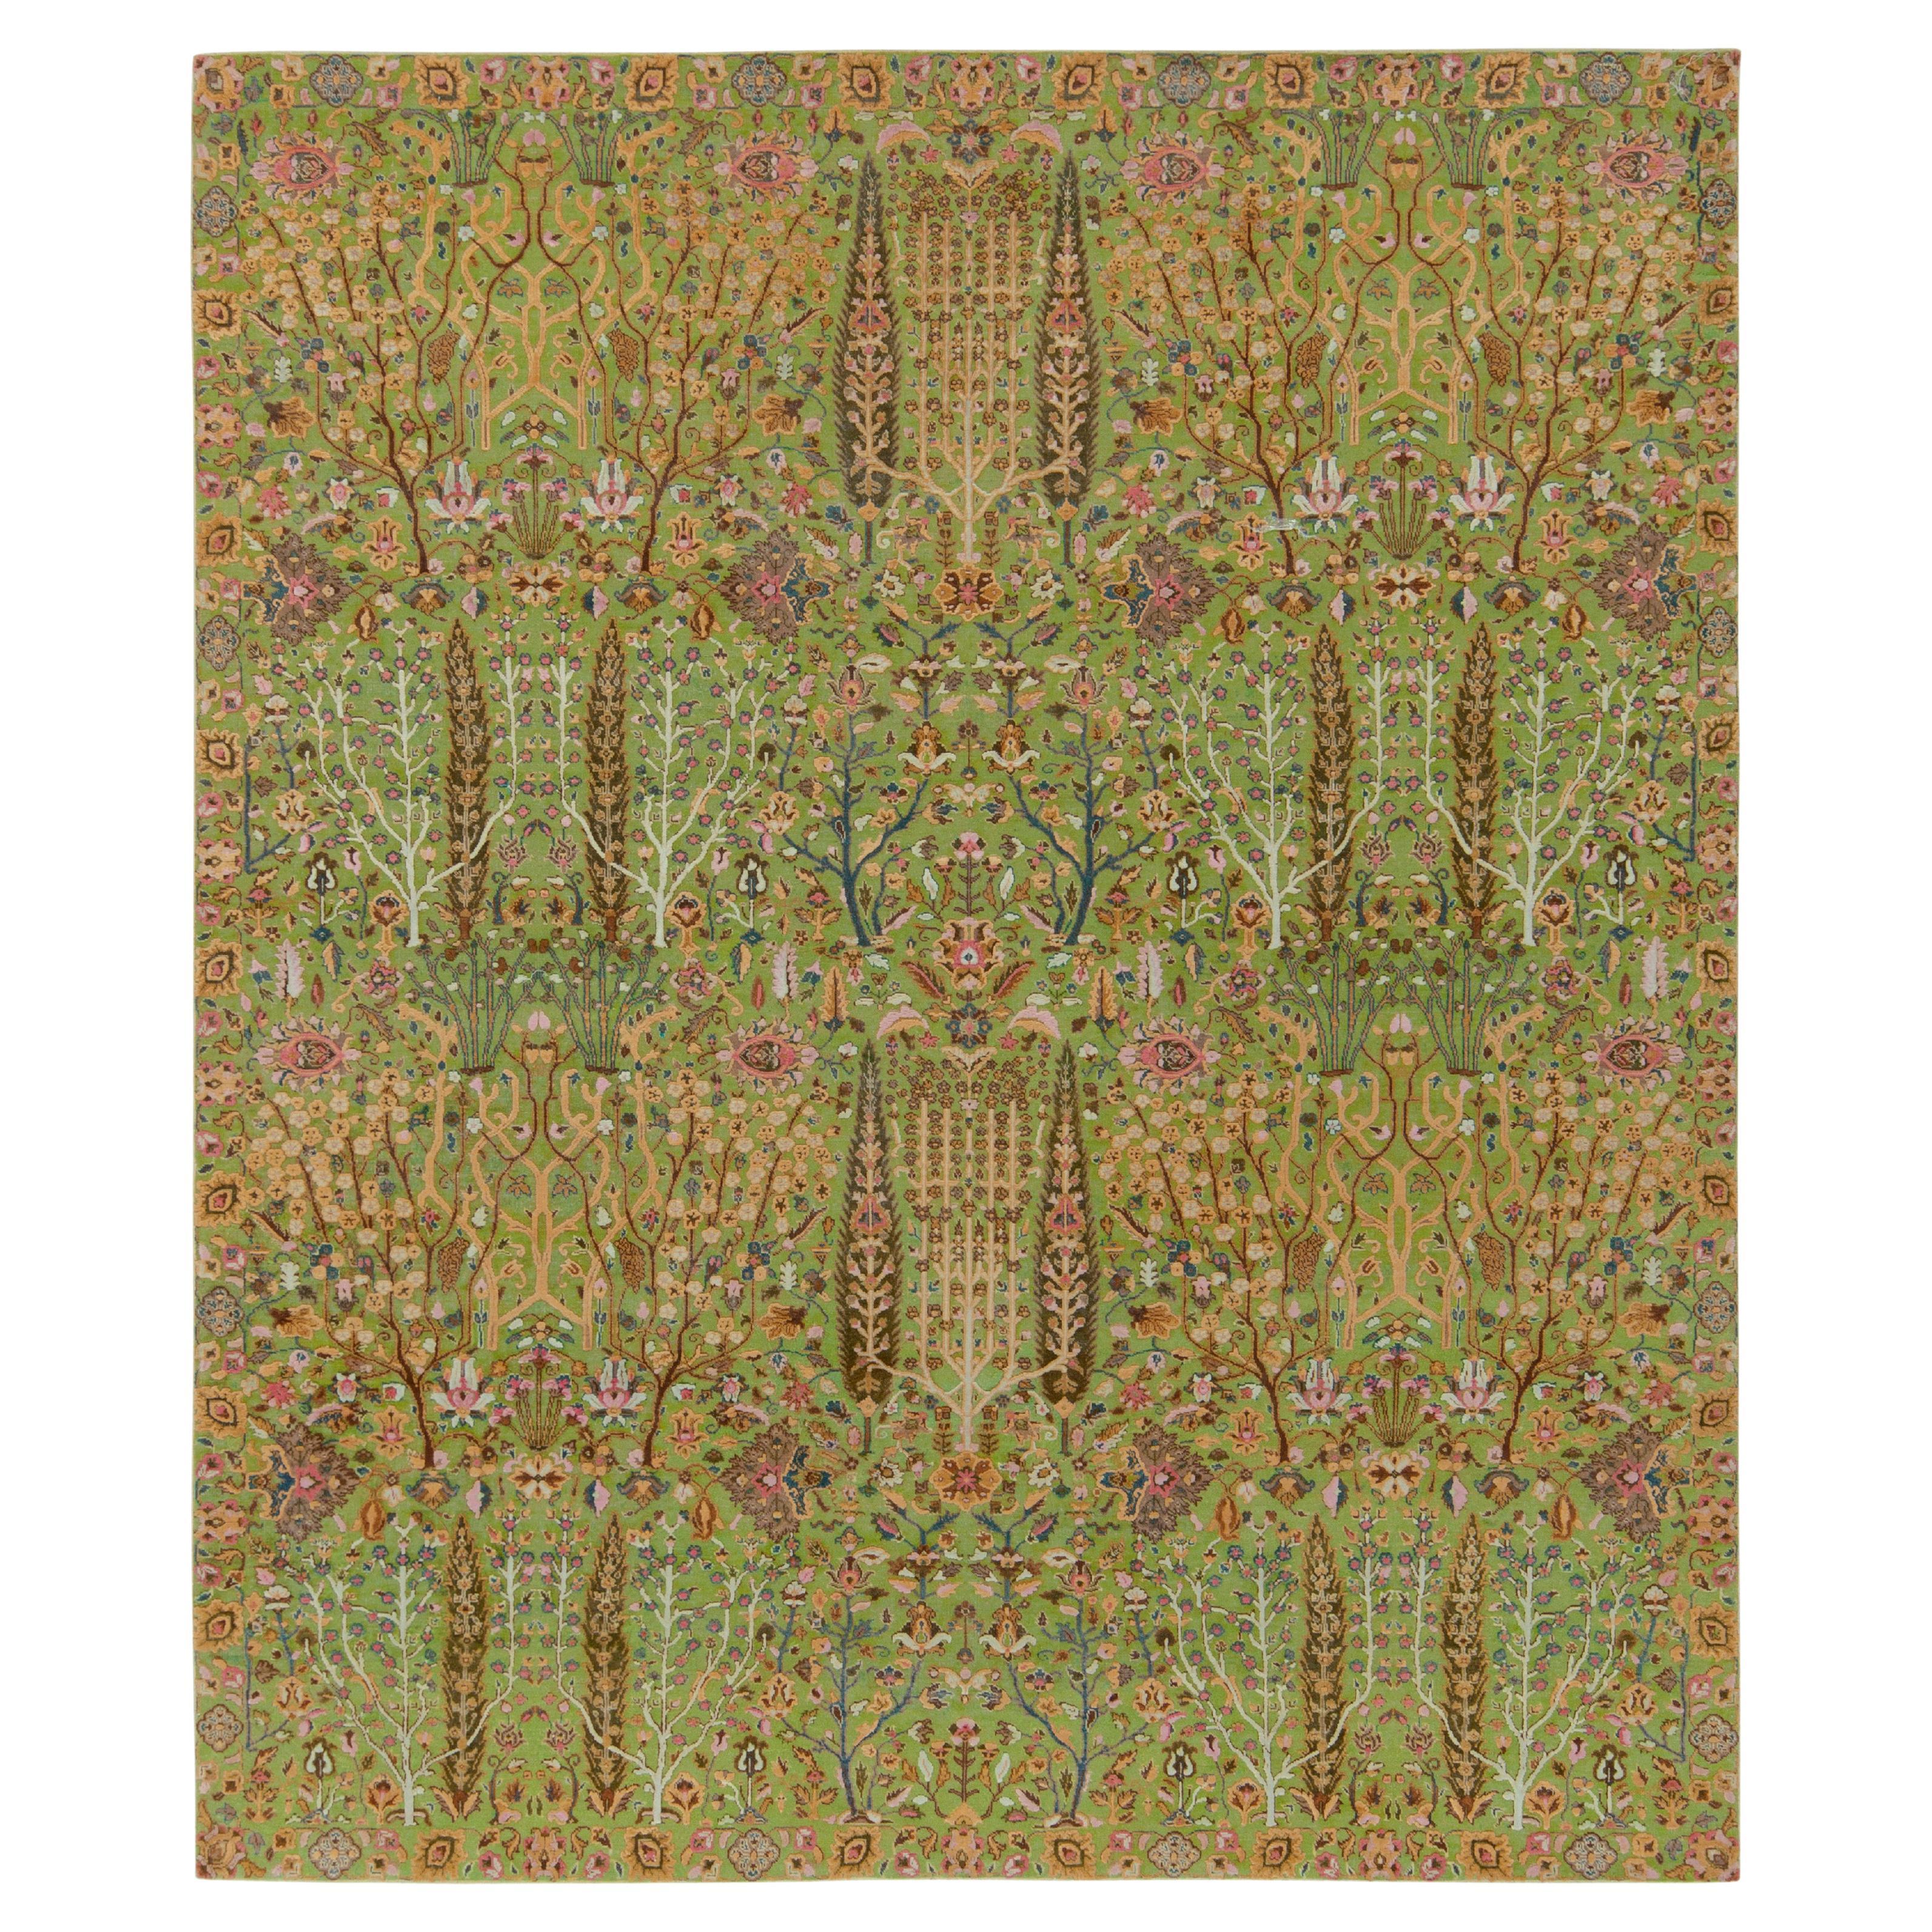 Rug & Kilim’s Classic Style Rug in Green, Pink, Brown Floral Pattern For Sale